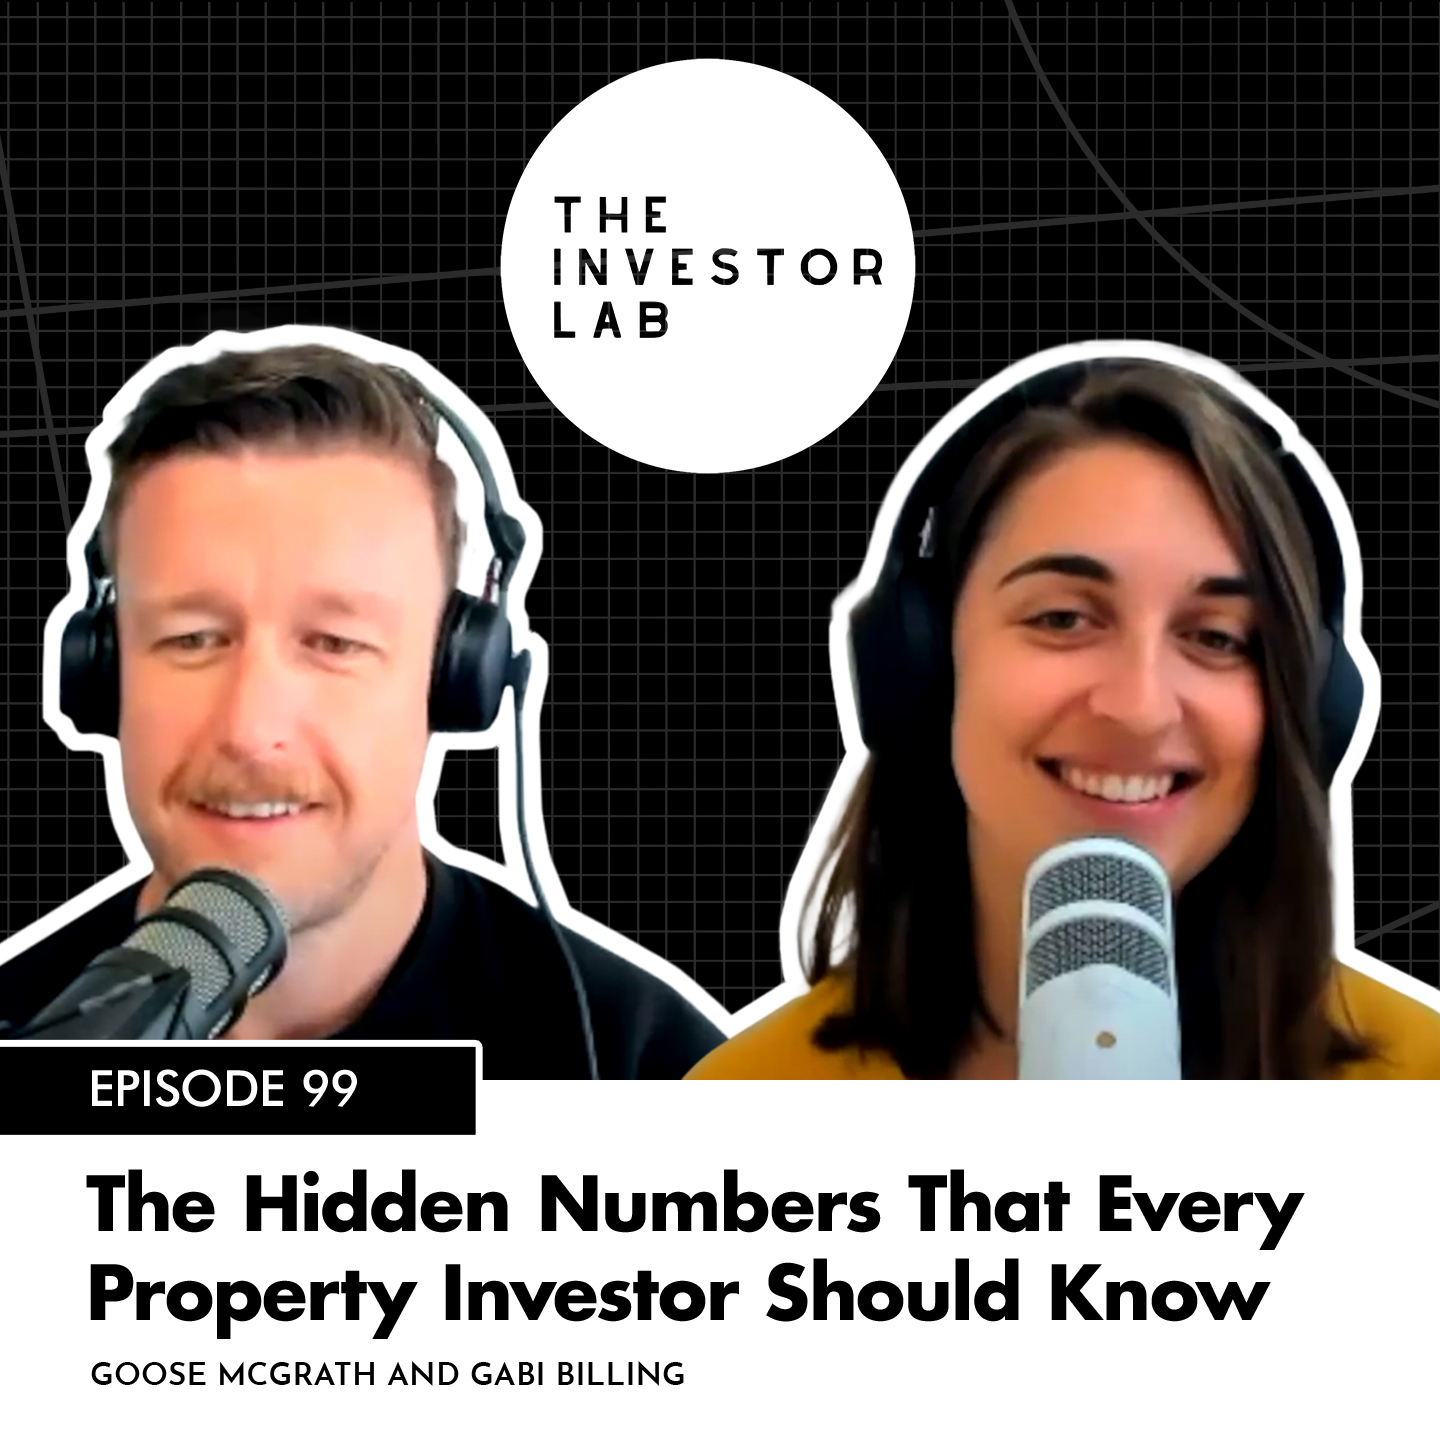 The Hidden Numbers That Every Property Investor Should Know